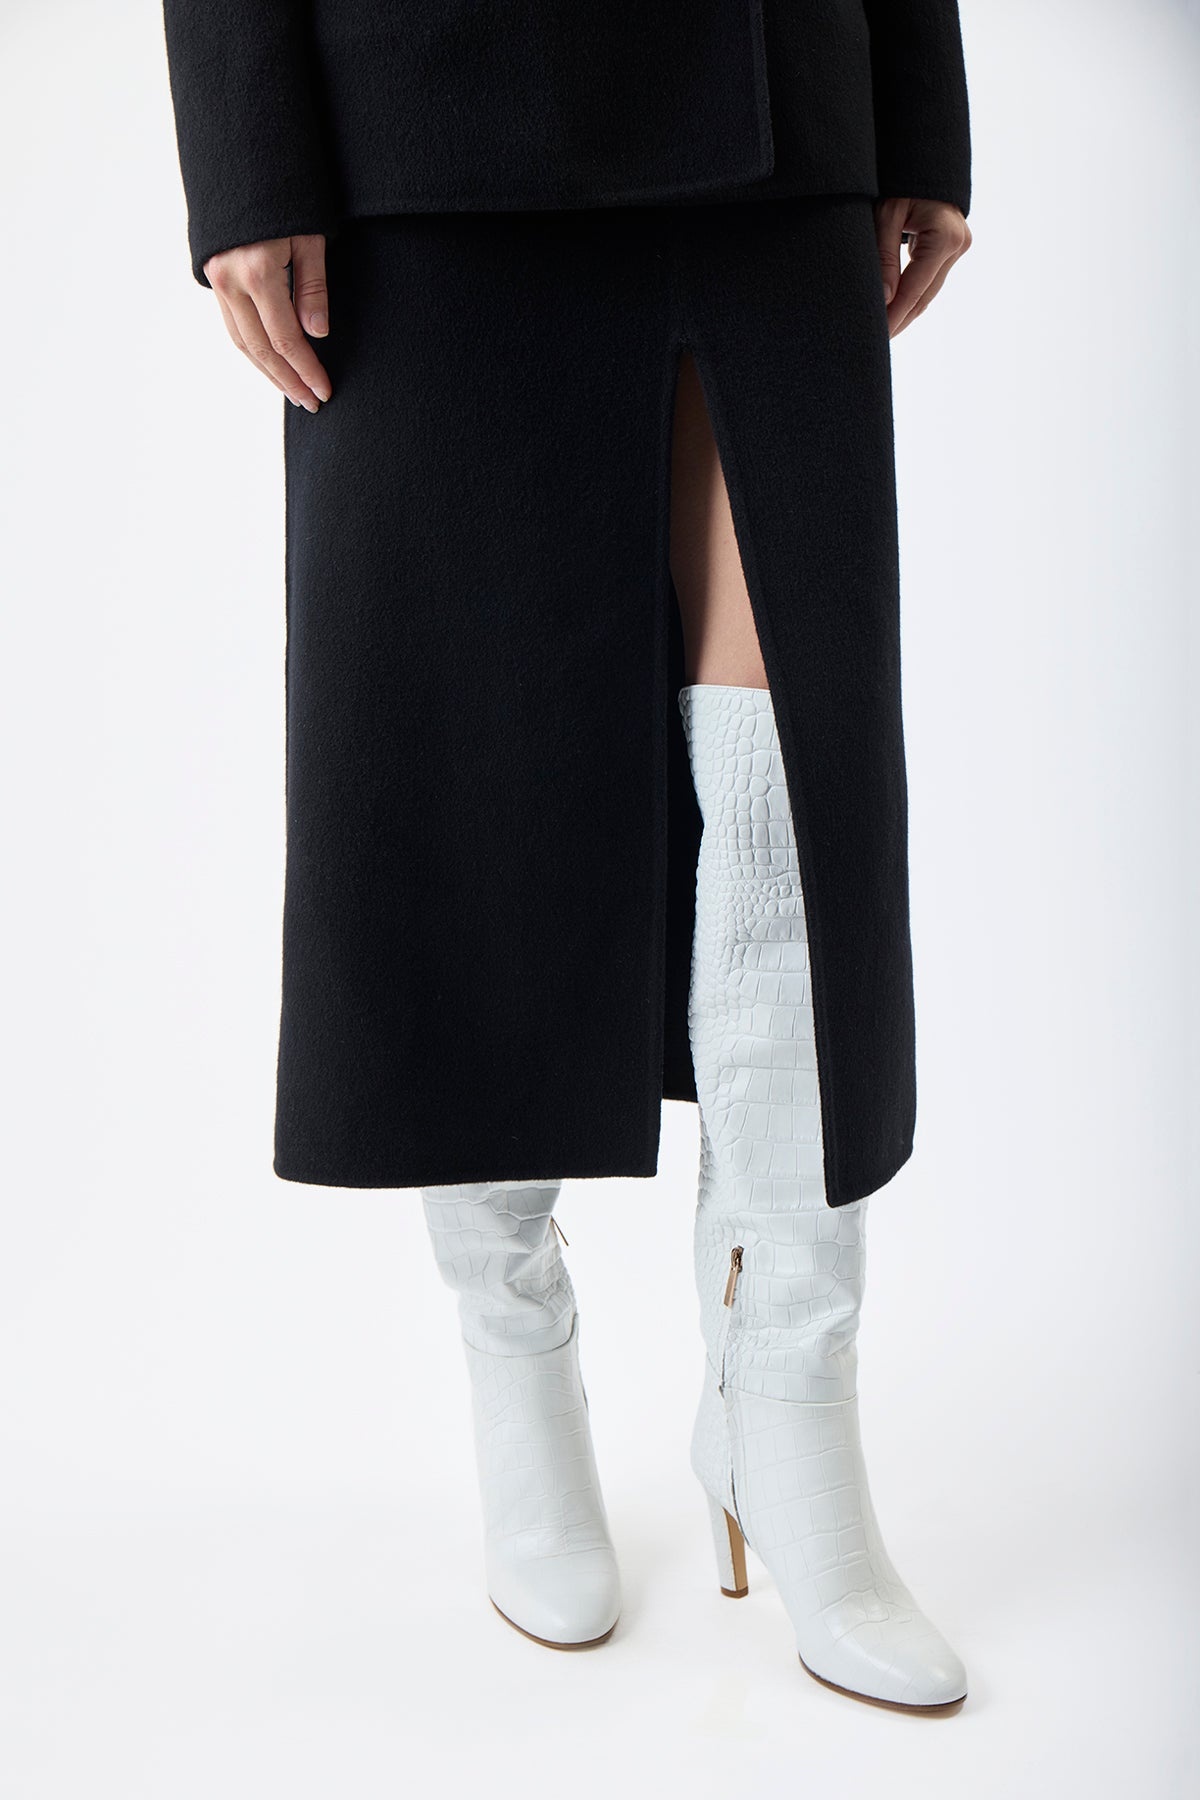 Morelos Skirt in Black Double-Face Recycled Cashmere - 6